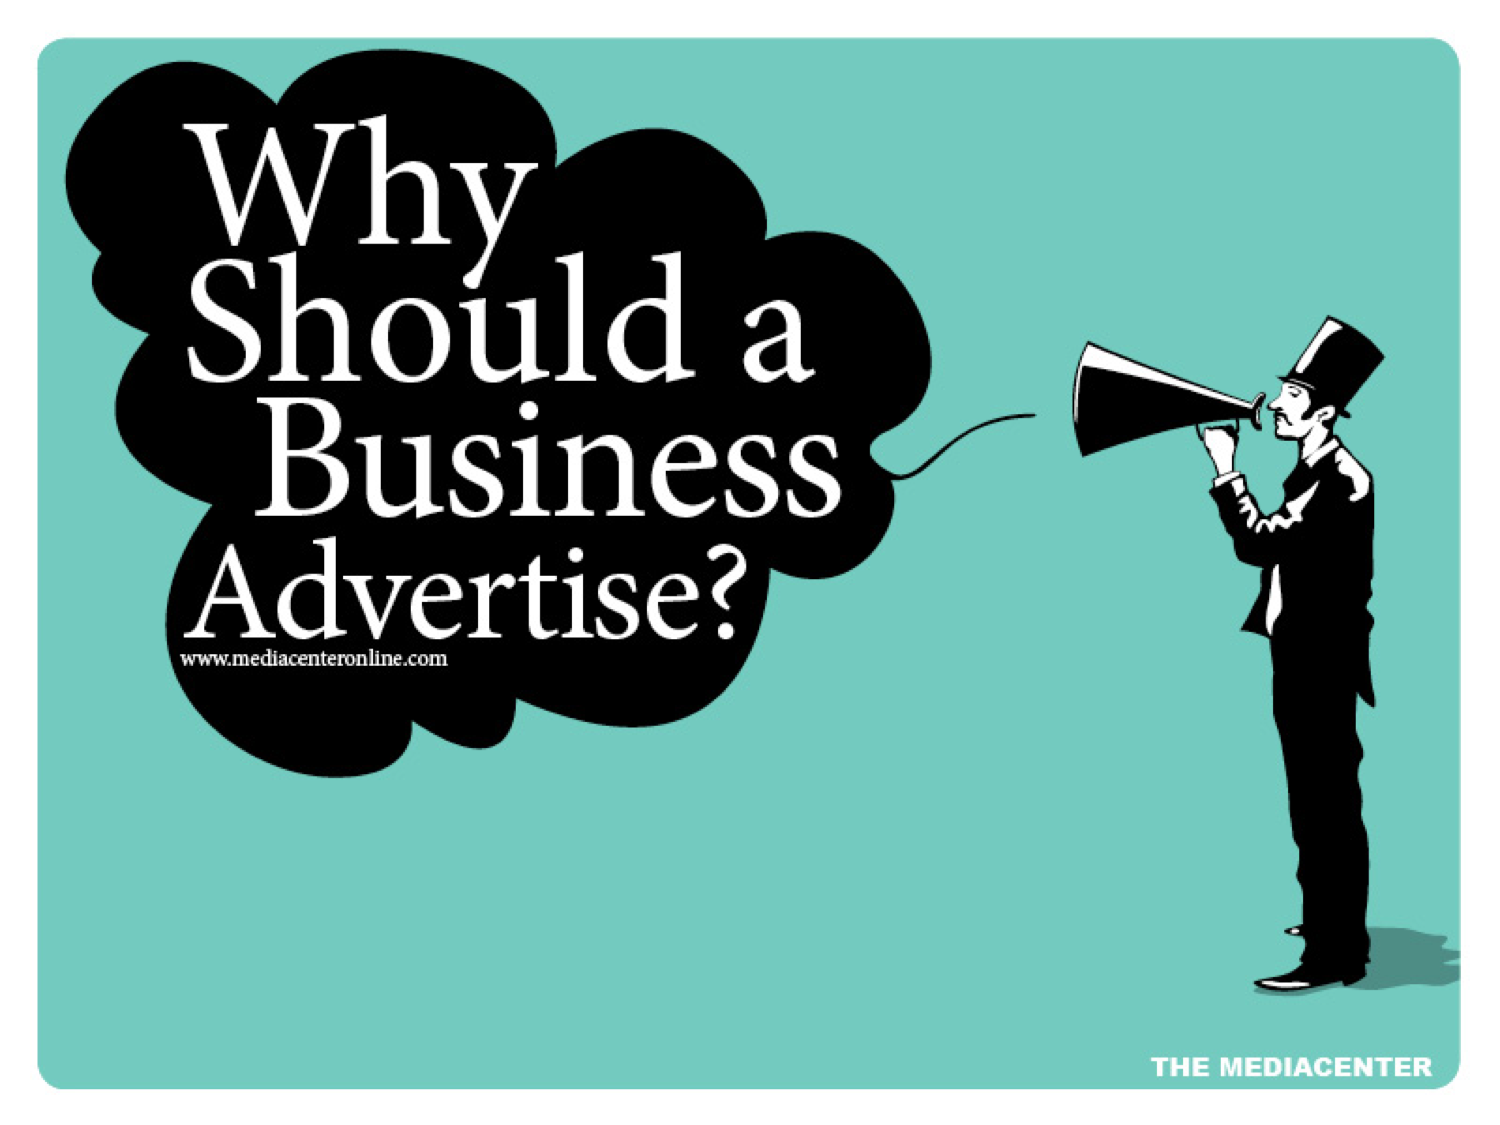 WHY SHOULD A BUSINESS ADVERTISE?